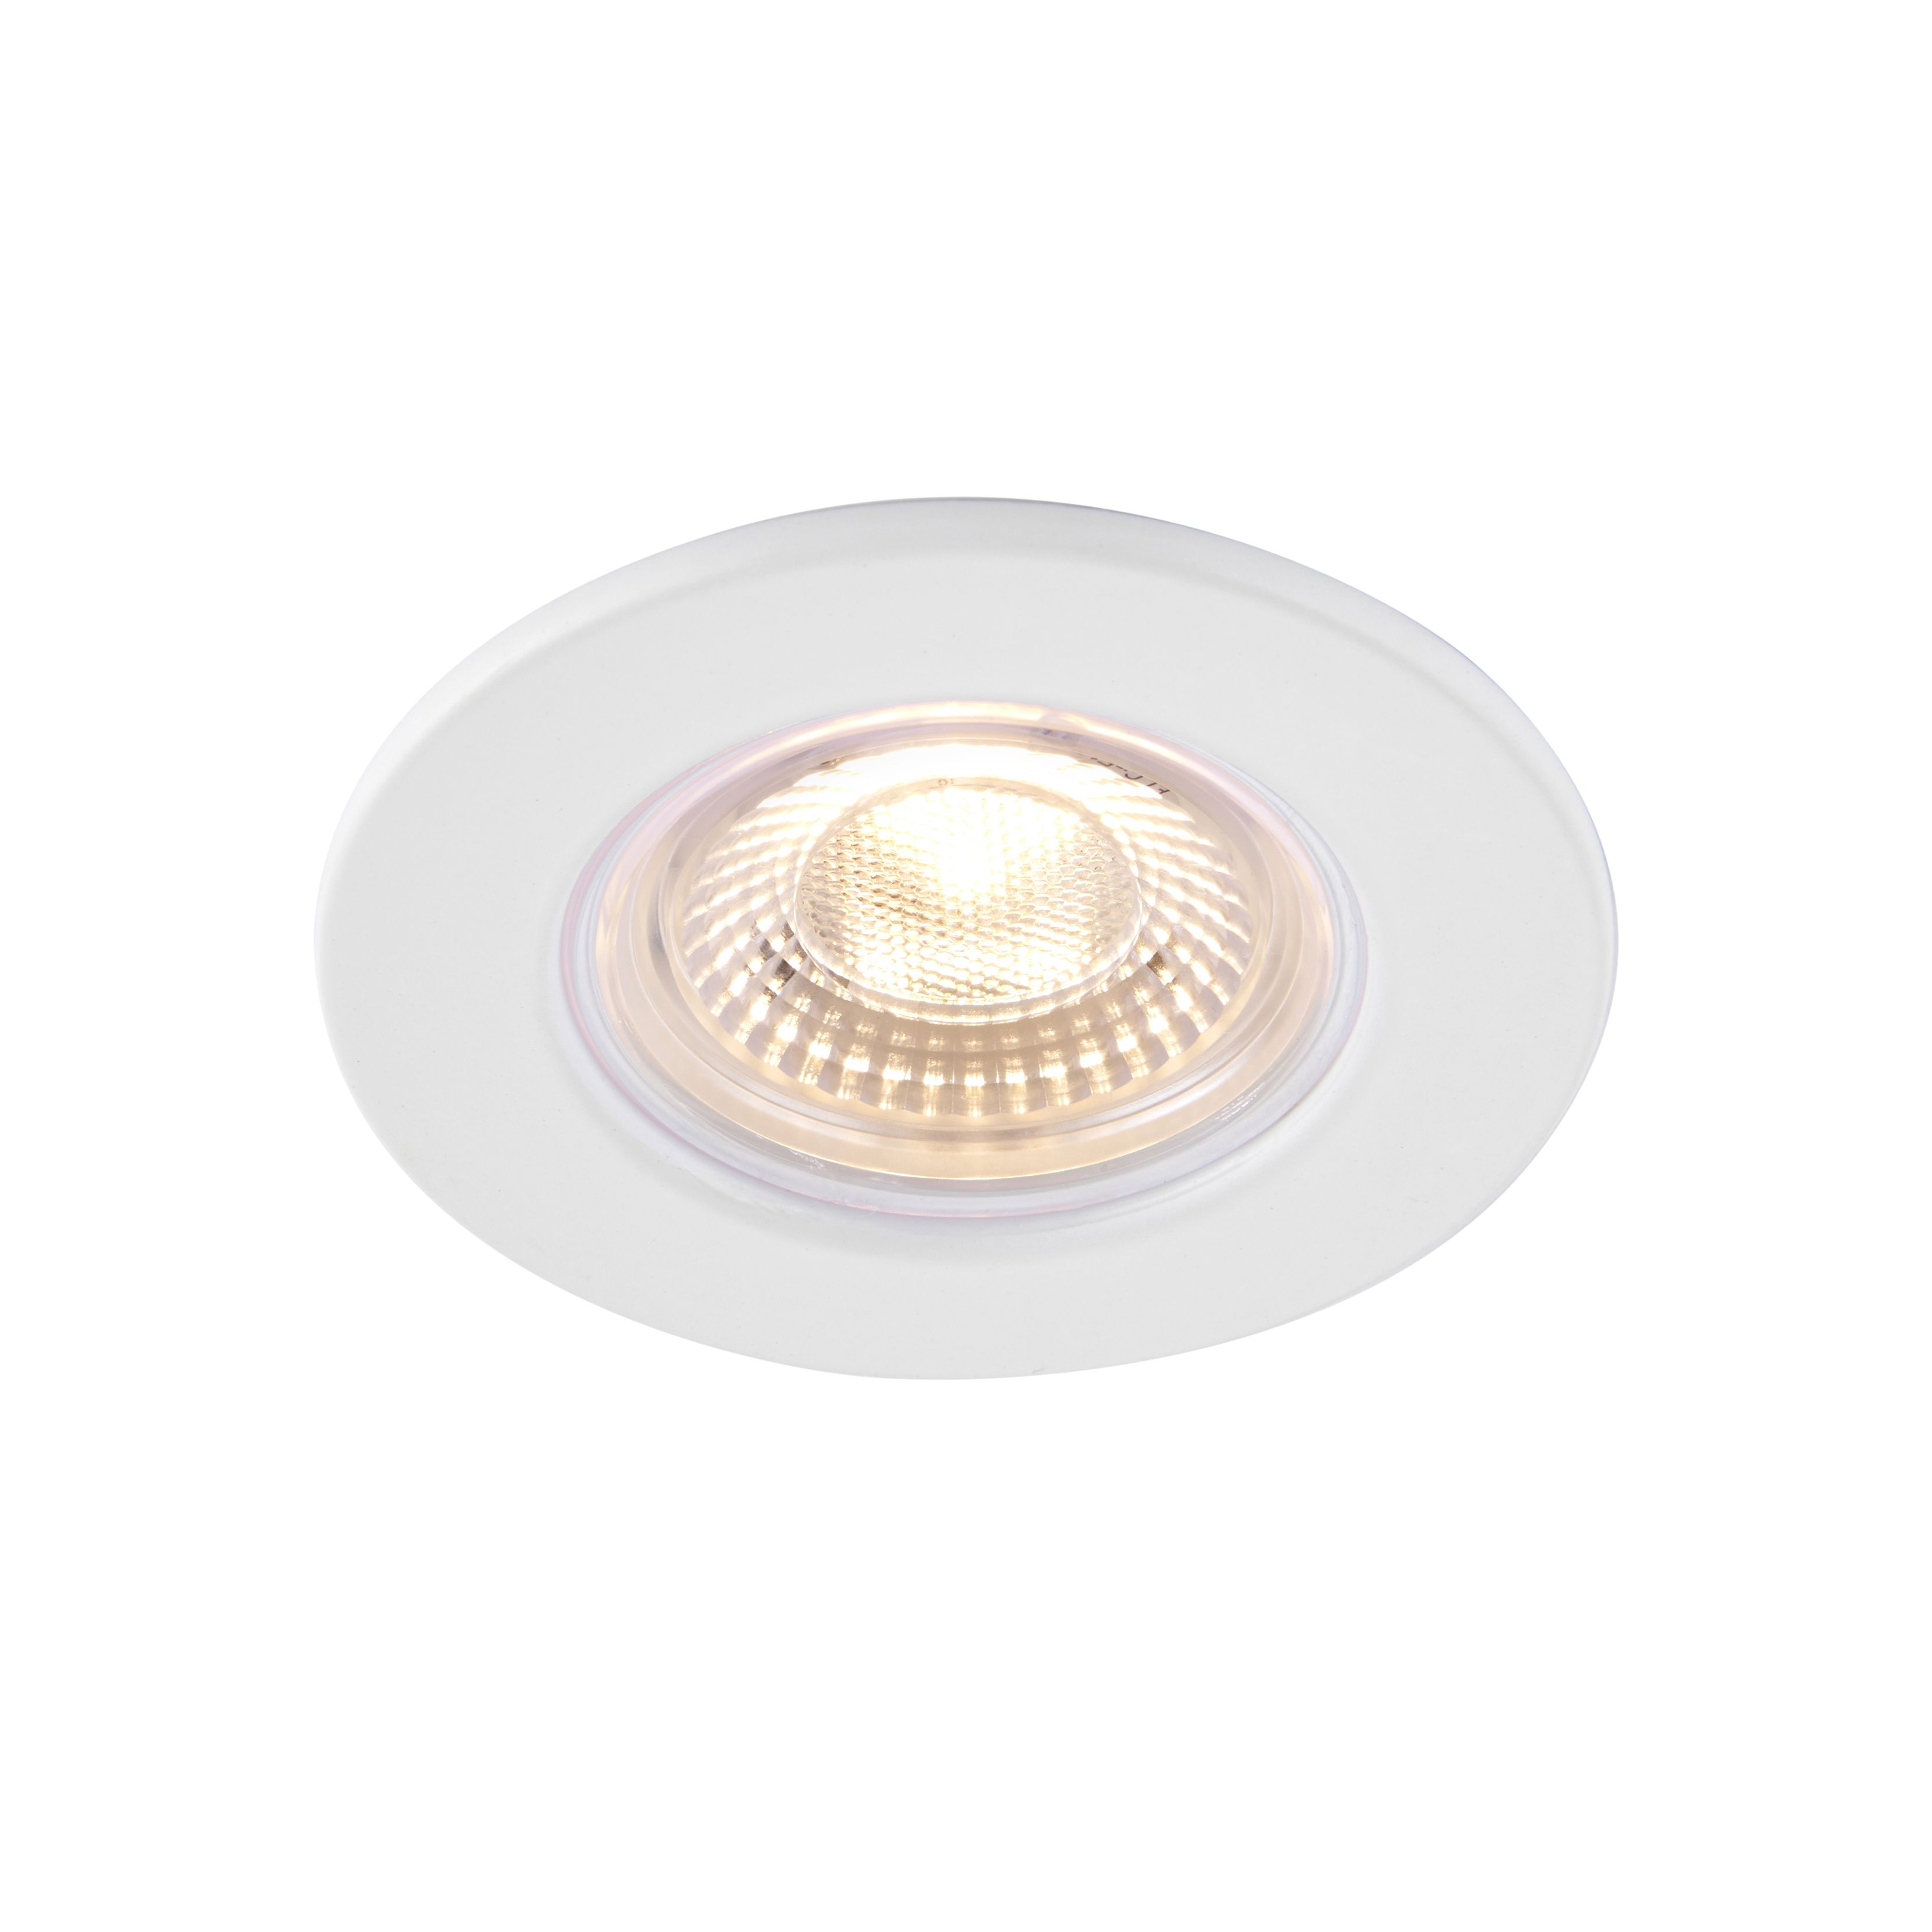 GuardECO White Non-adjustable LED Warm white Downlight 6W IP65, Pack of 10